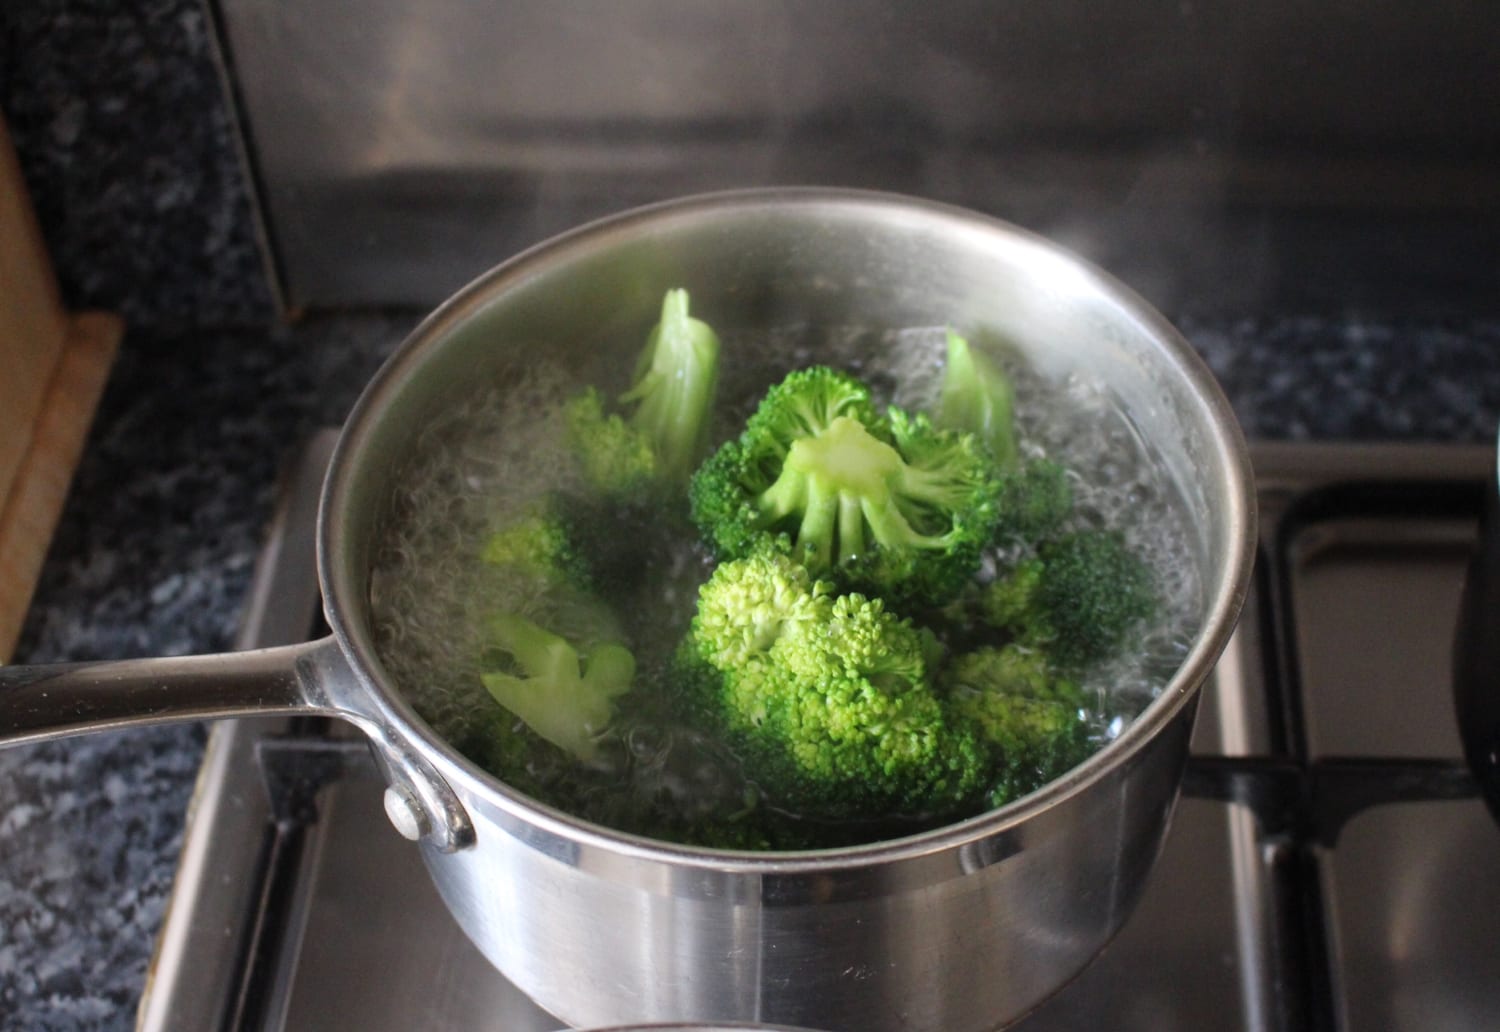 Cooking Broccoli Today Inline2 190225 